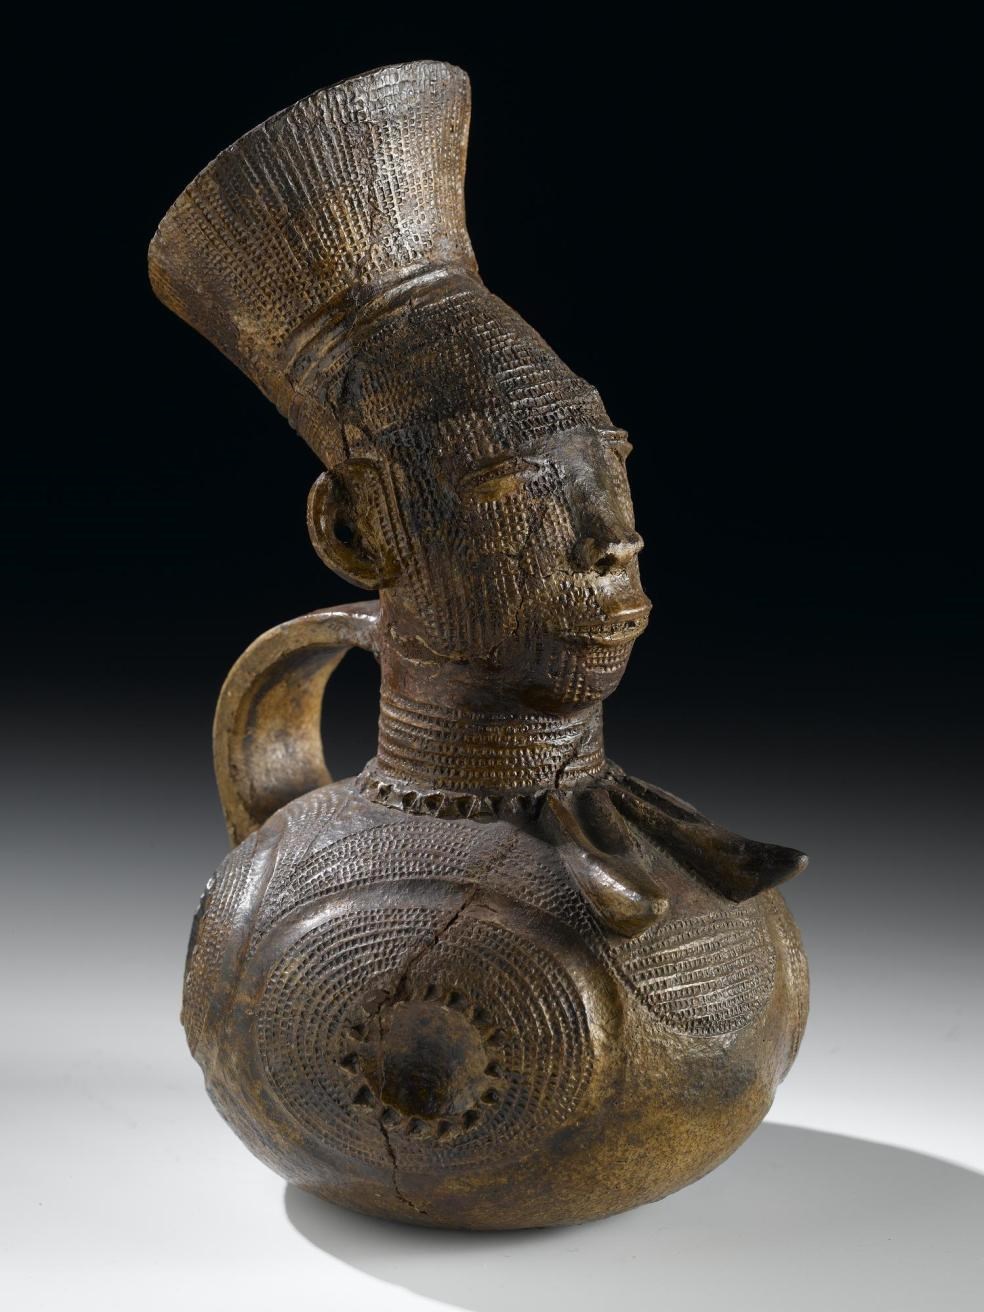 Early 20th century hand-modelled clay jug  from the Democratic Republic of the Congo, in the form of a high status Mangbetu woman with elaborate hairstyle and body decoration.